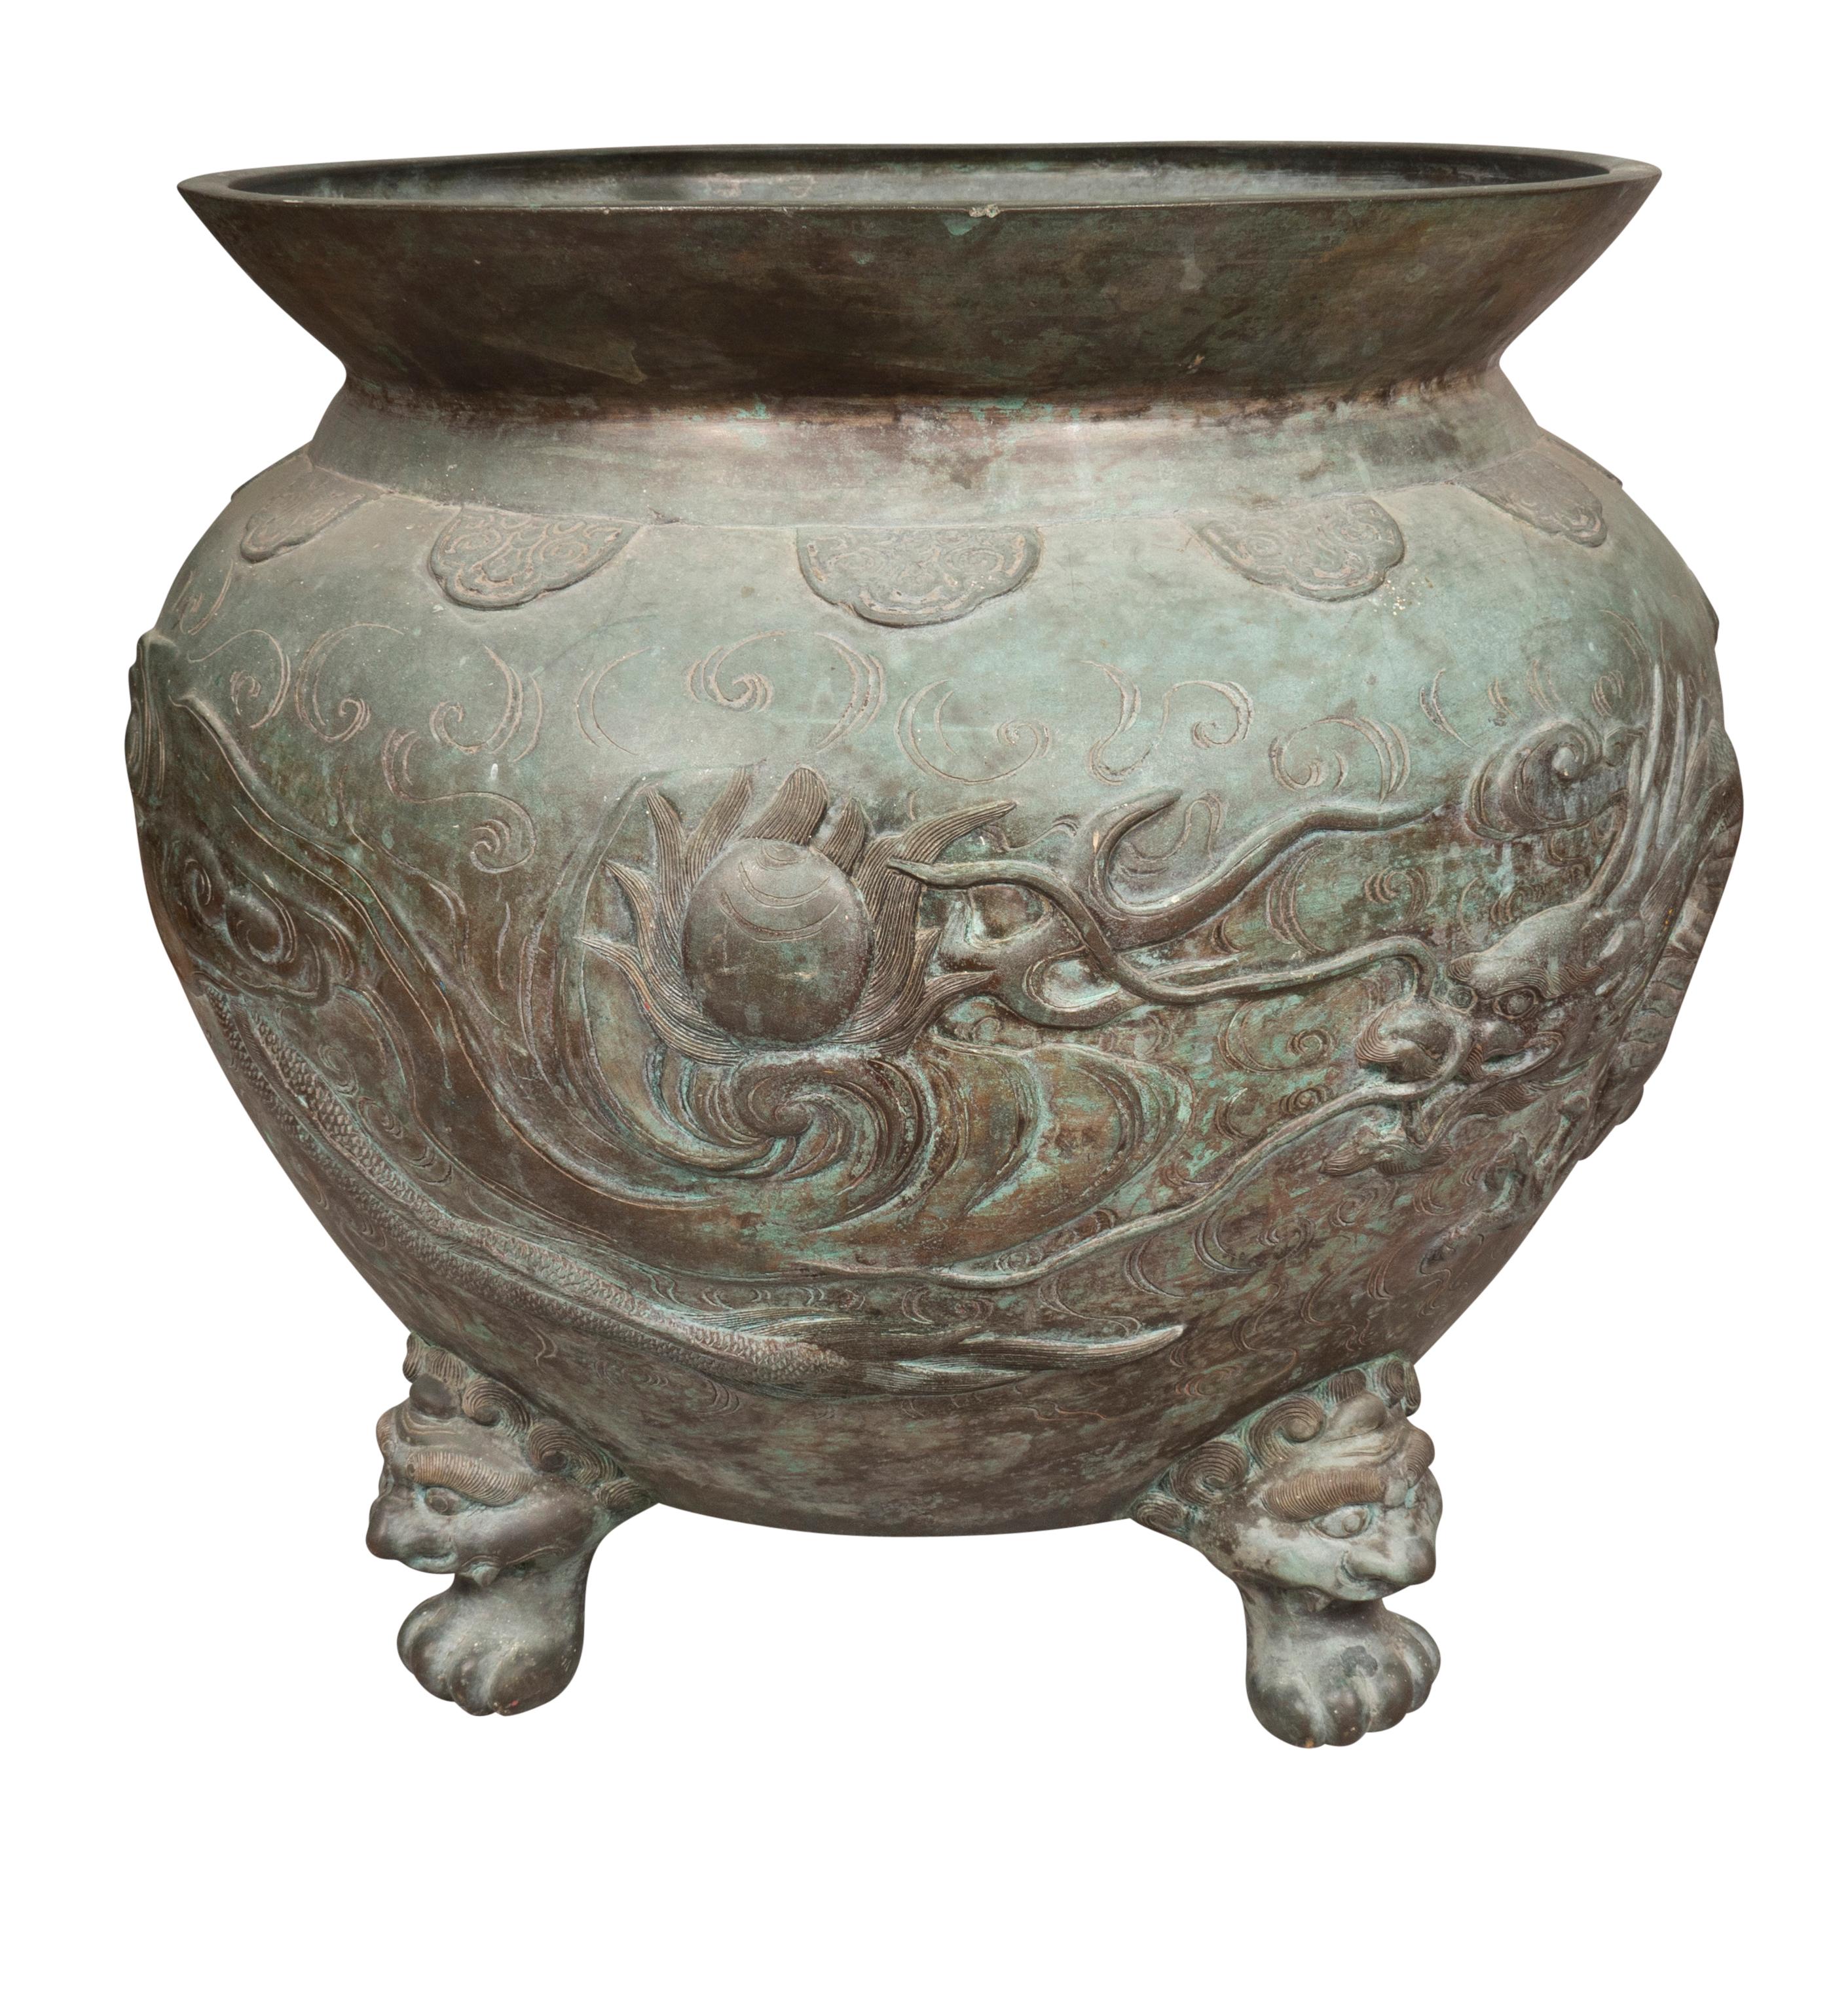 Globular form in vertigris patina decorated with dragons , clouds and the sacred pearl. The dragon and the pearl is a common Chinese image and a well known story in Chinese folklore. Buddhistic dog feet.